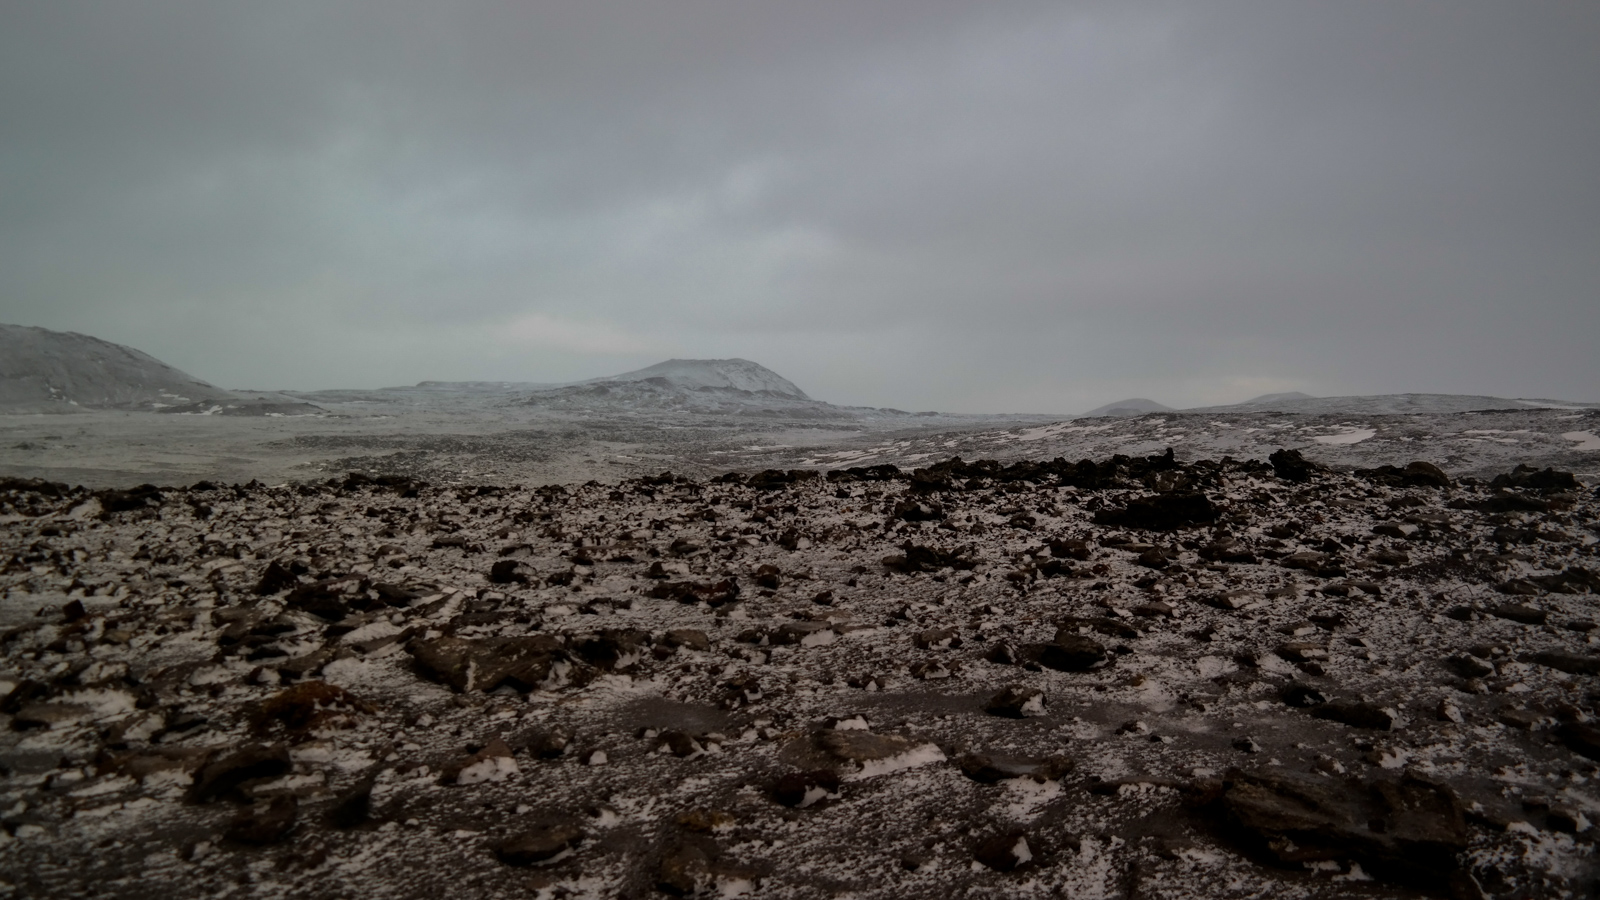 36 Hours Of Glaciers And Steam In Iceland